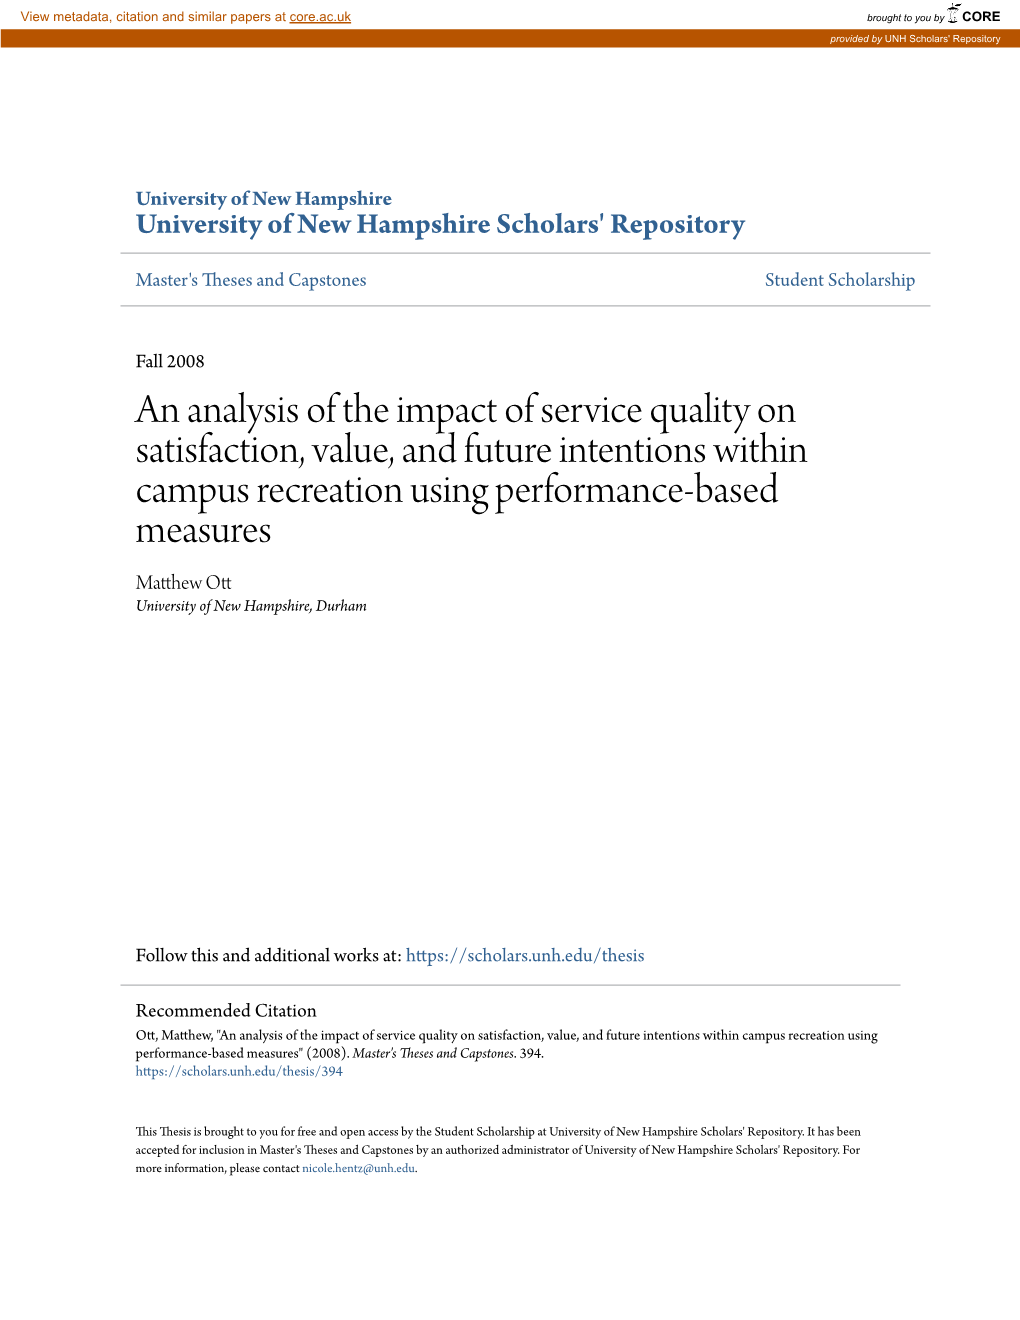 An Analysis of the Impact of Service Quality on Satisfaction, Value, And